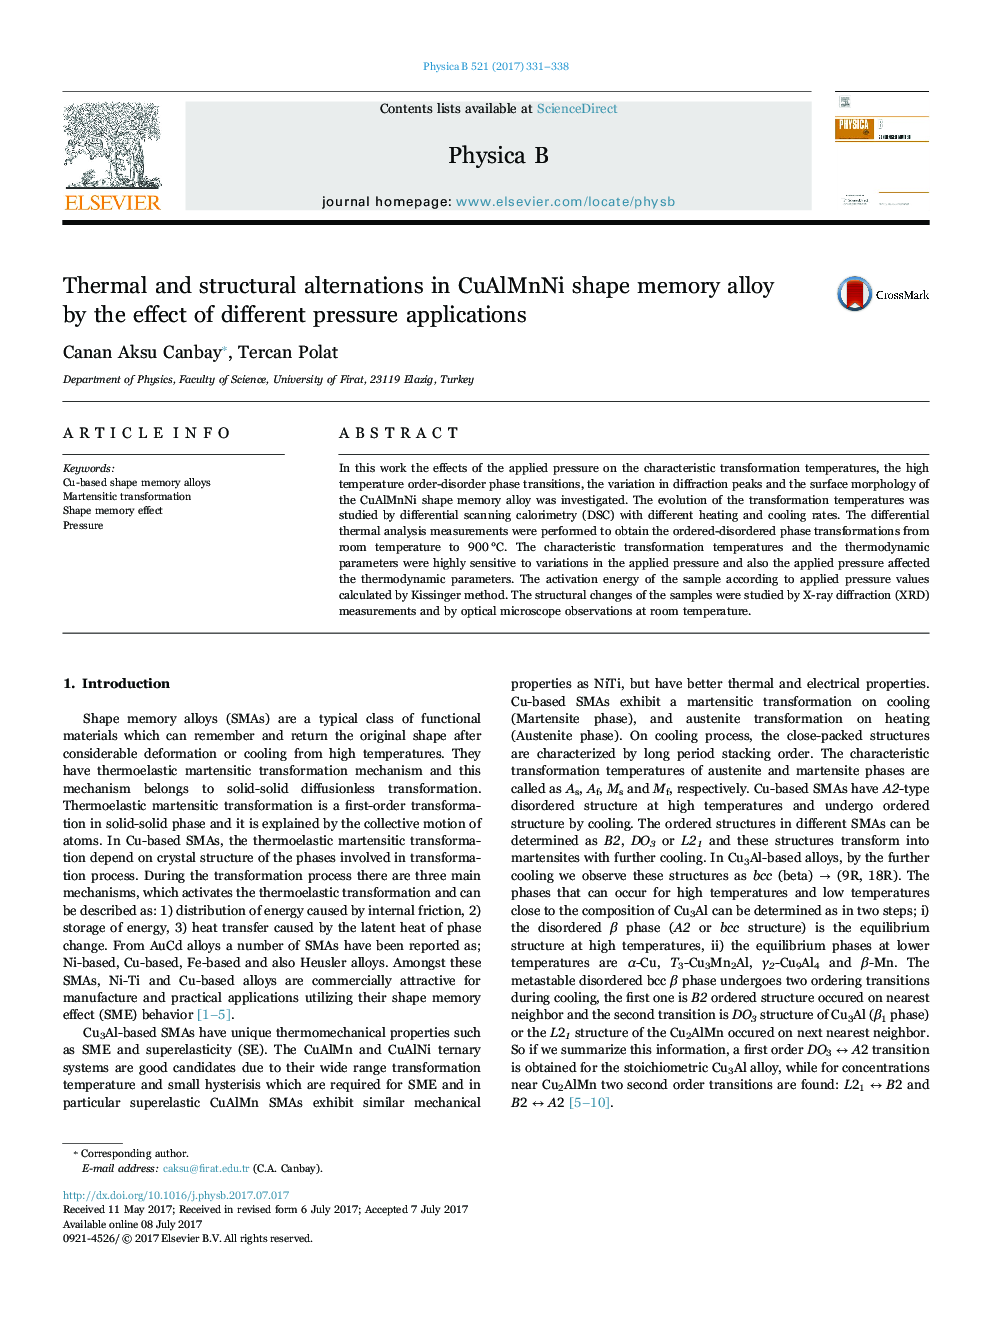 Thermal and structural alternations in CuAlMnNi shape memory alloy by the effect of different pressure applications